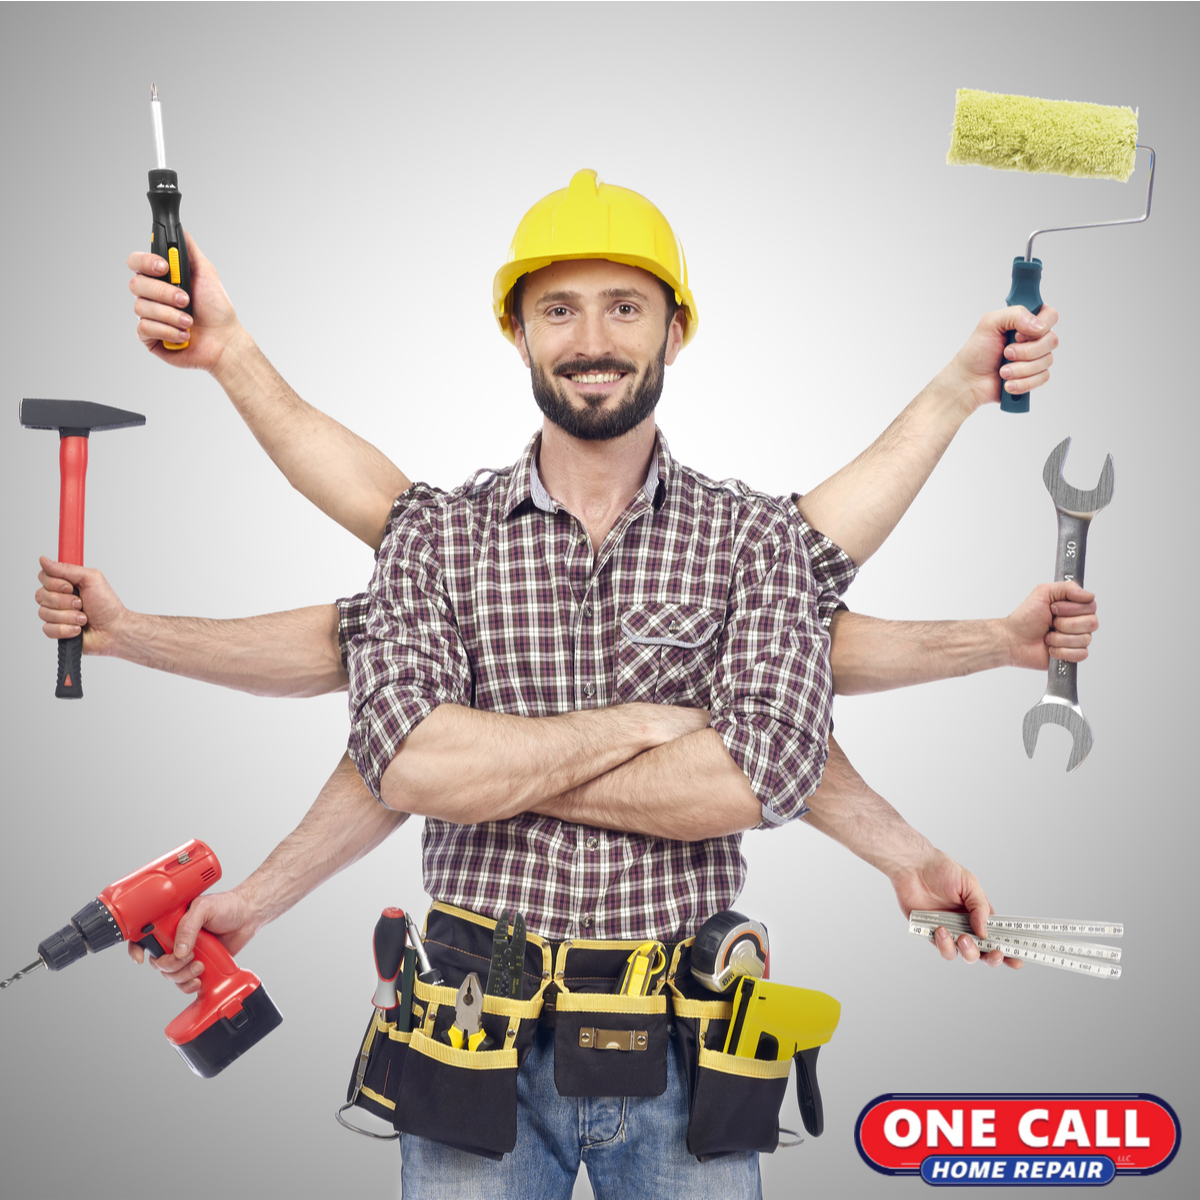 One Call Home Repair, A Company to Rely on for Interior and Exterior Home Repair Services!